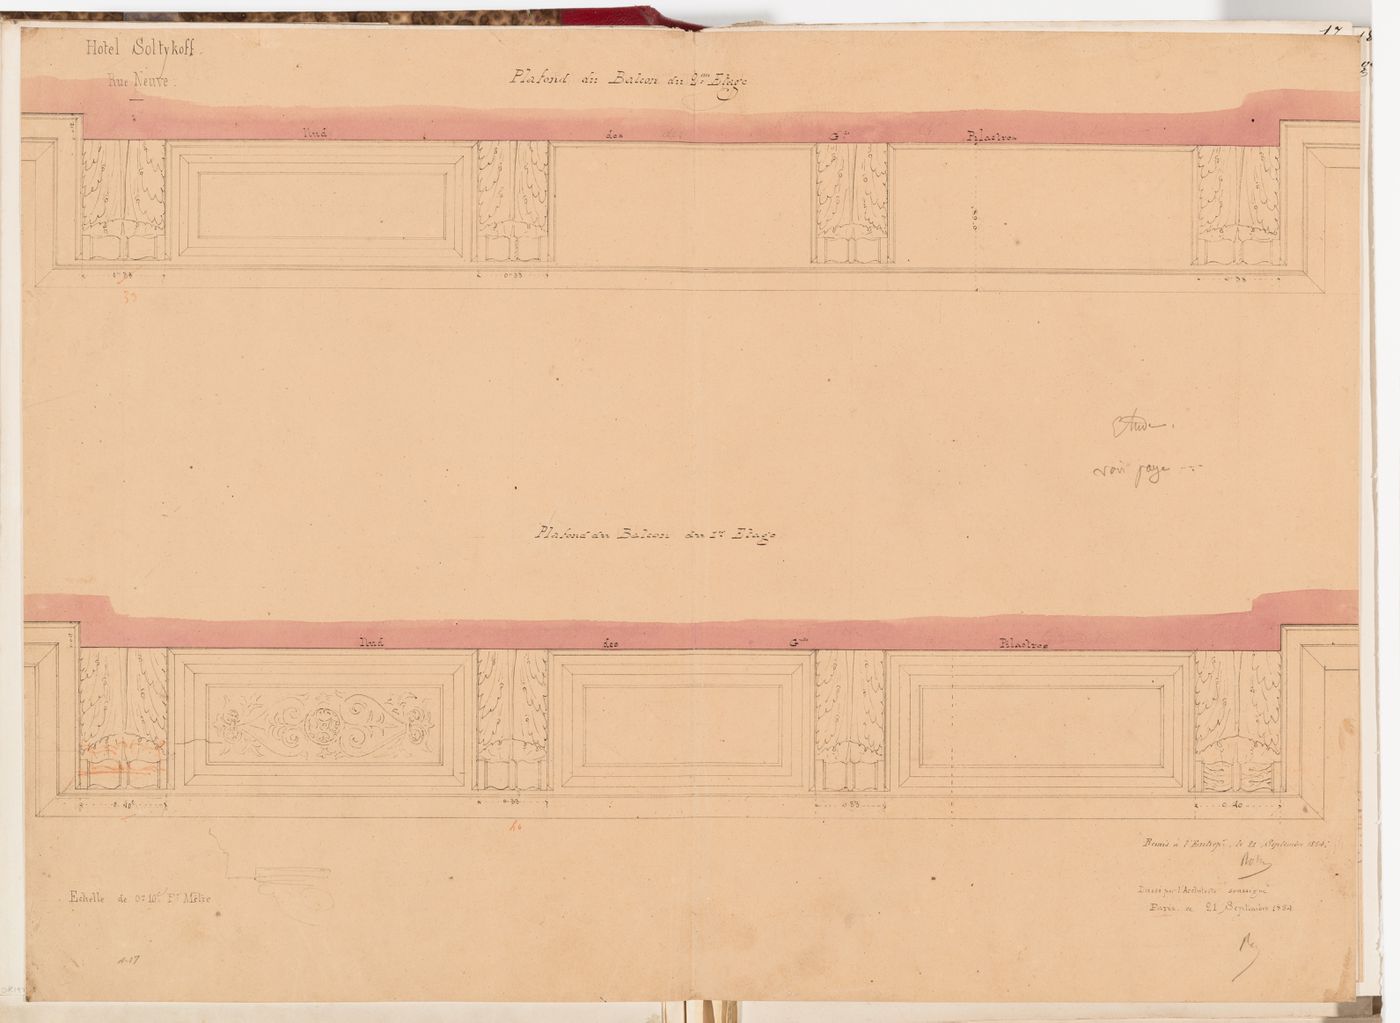 Reflected ceiling plans for the first and second floor balconies, Hôtel Soltykoff